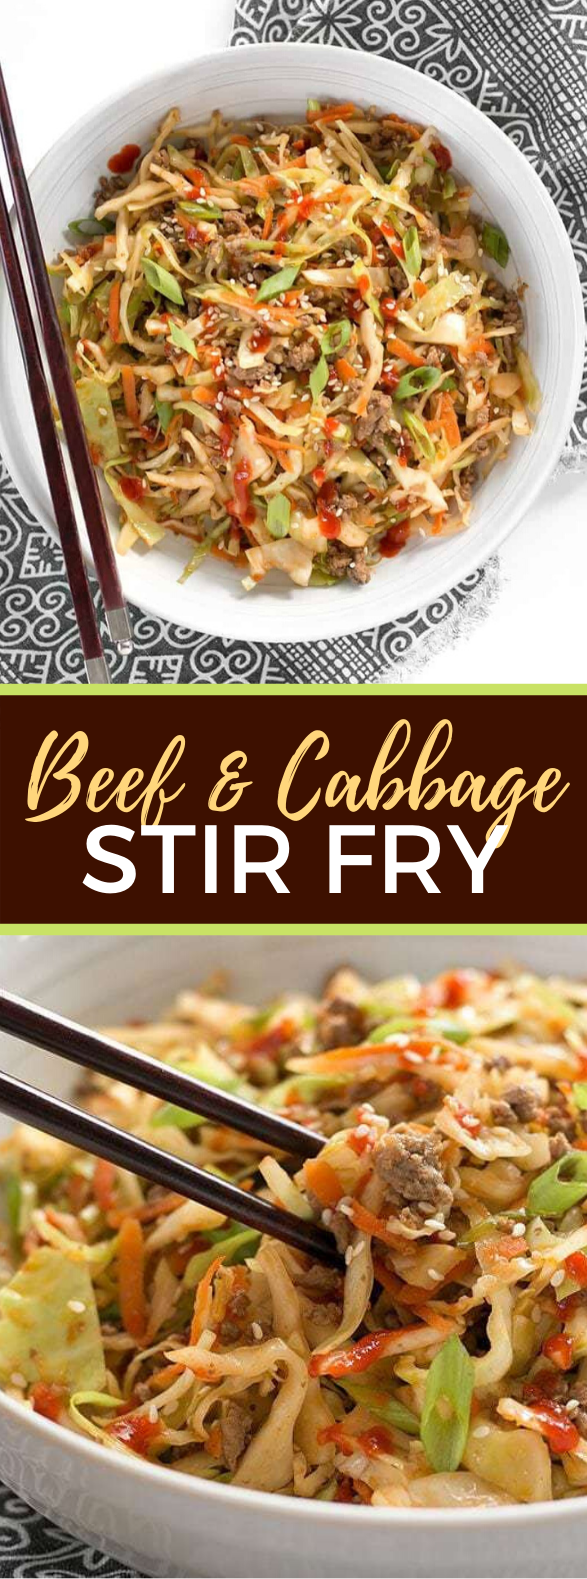 BEEF AND CABBAGE STIR FRY #lowcarb #healthydinner